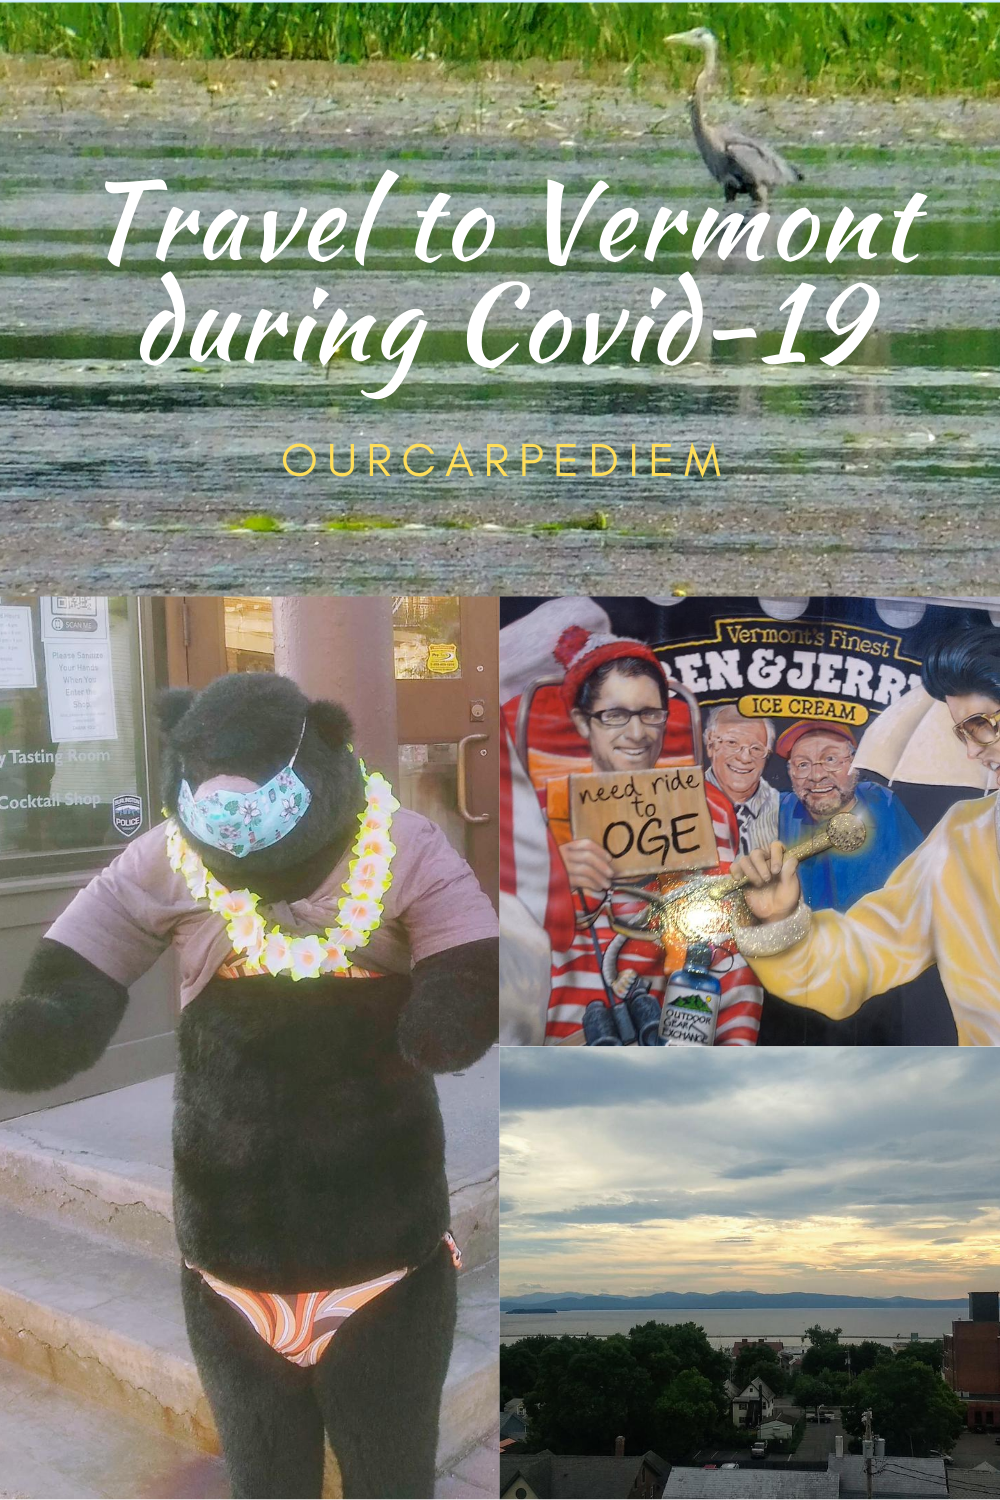 Travel to Vermont during Covid-19 pandemic How to prepare. Who needs to quarantine? Our experience and precautions to take. Are masks required? How about dining out? #Travelguide #Covid19 #pandemic #StaySafe #Vermont #Burlington #OurCarpeDiem. Our experience at the Hilton hotel. #WearAMask What are the requirements for travel to Vermont? Which restaurants are recommended? Do people socially distance?